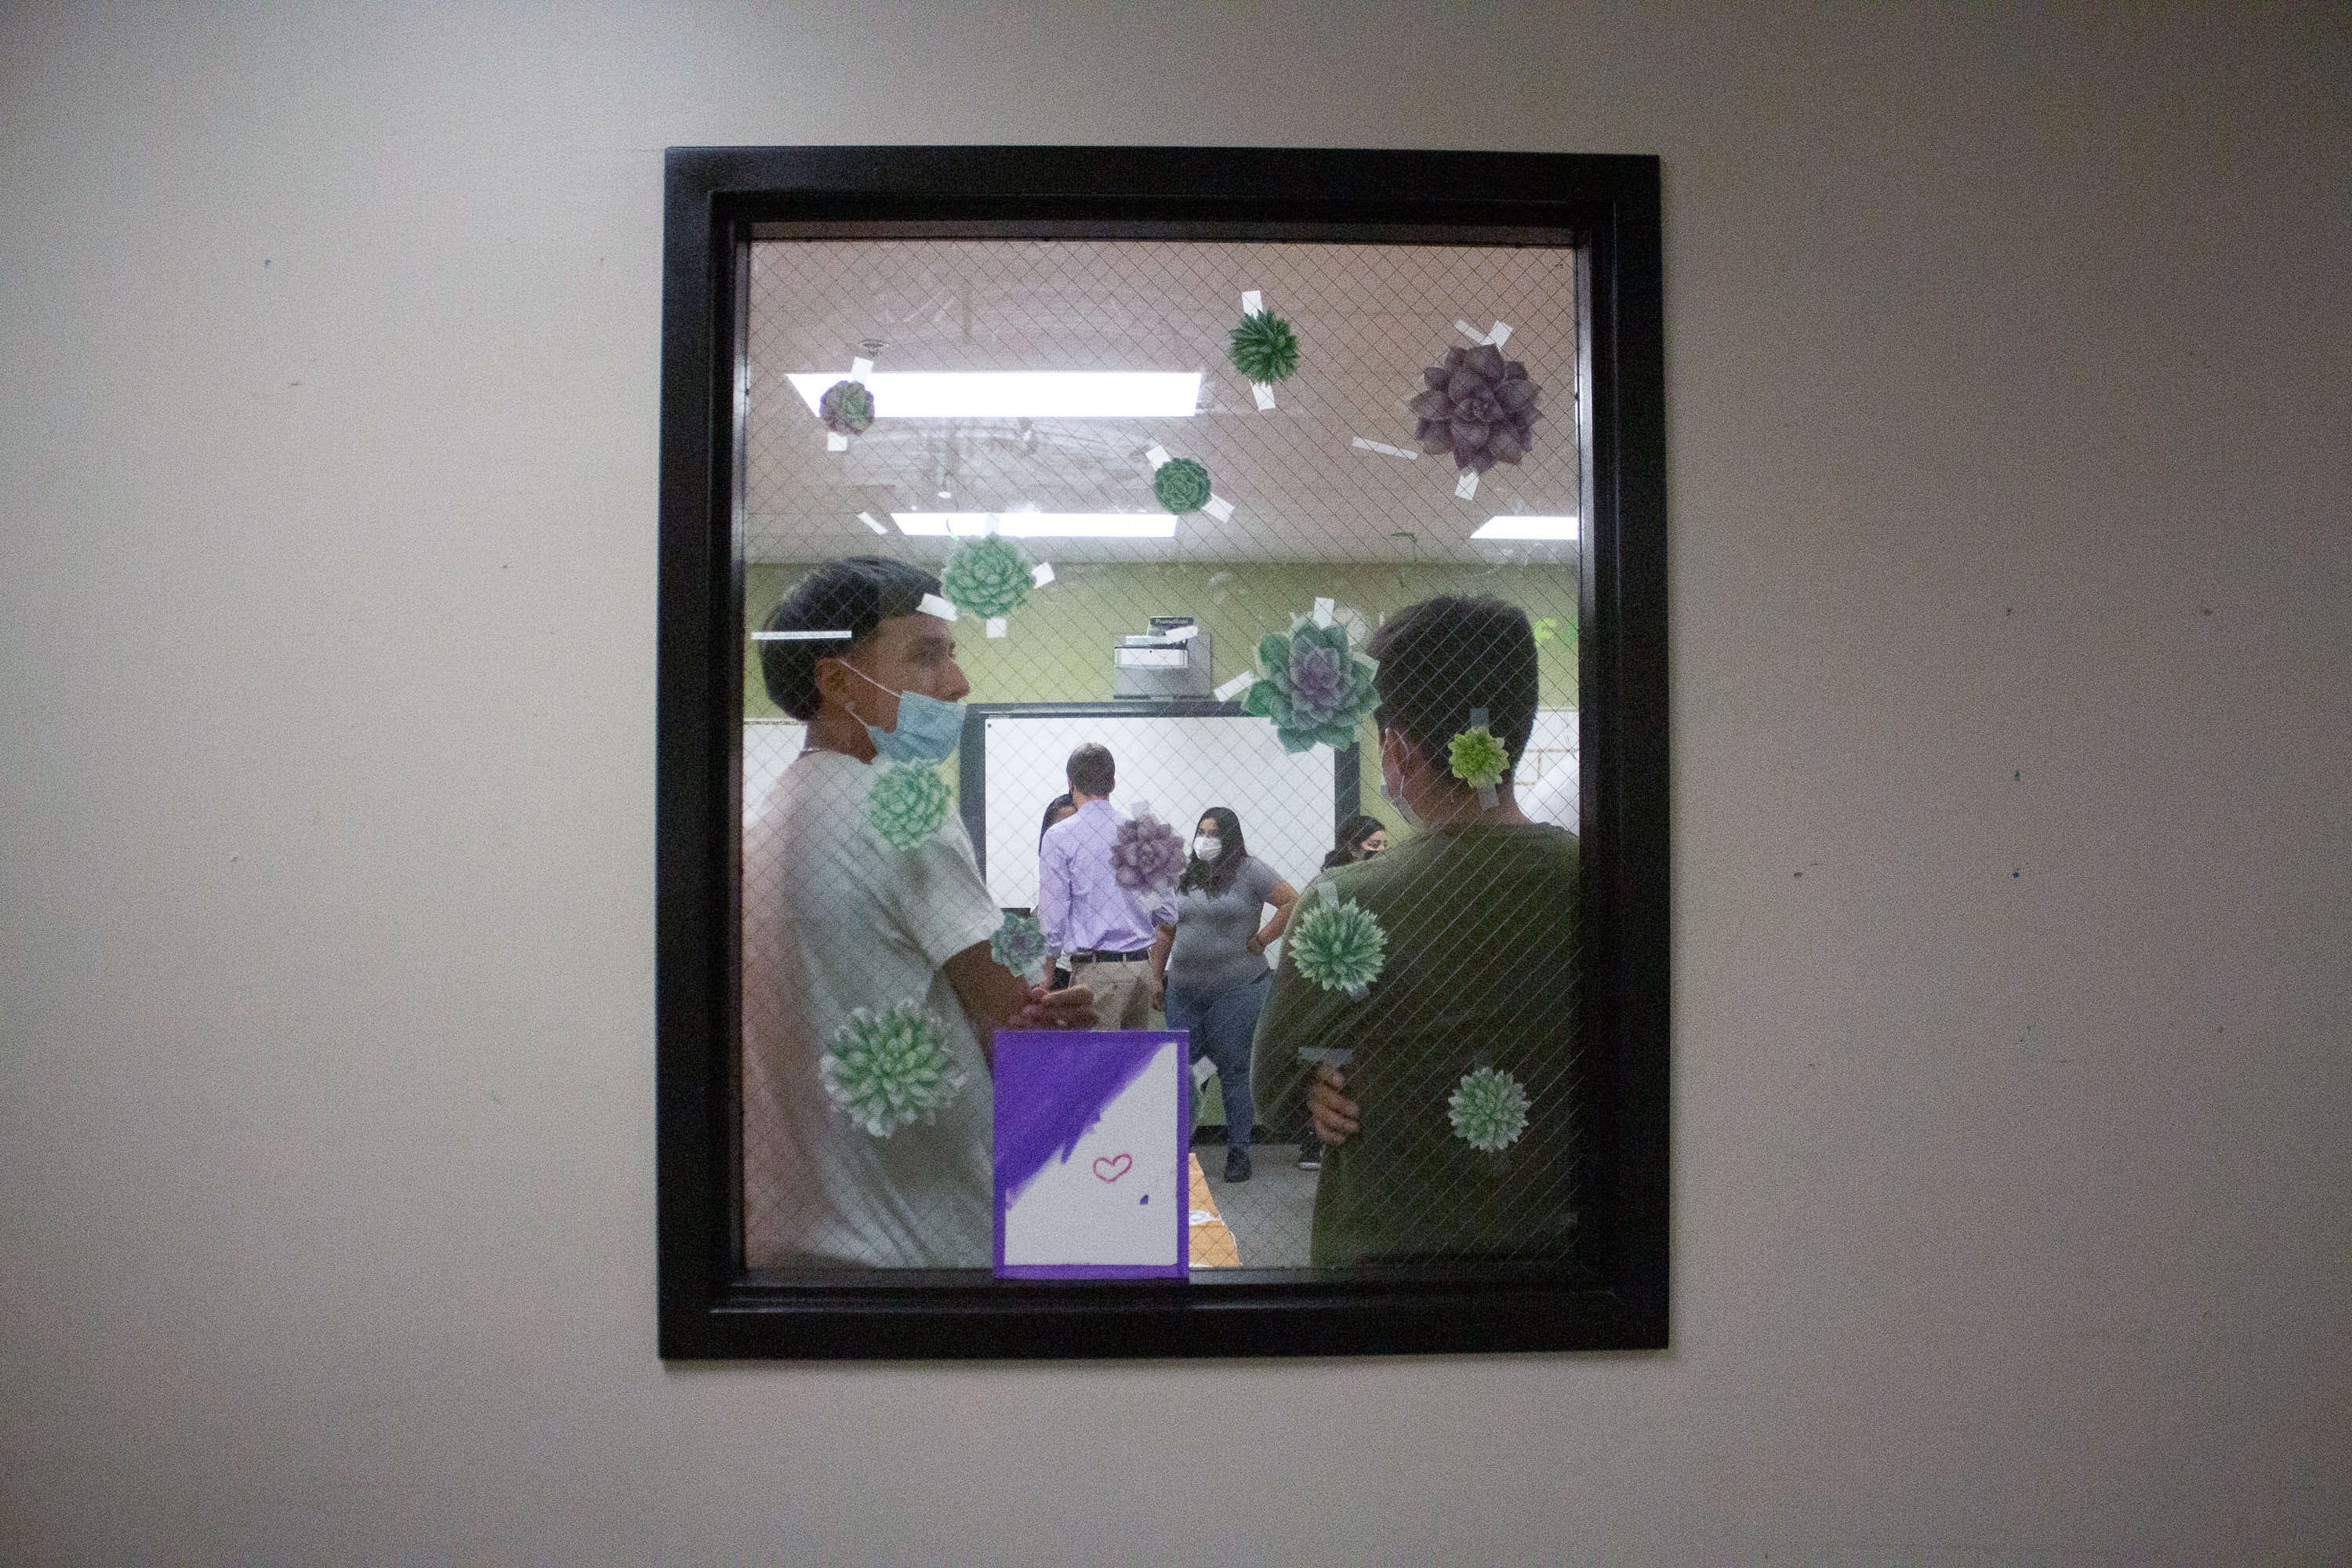 Two students are framed by a window decorated with decals. One student wears a blue face mask.